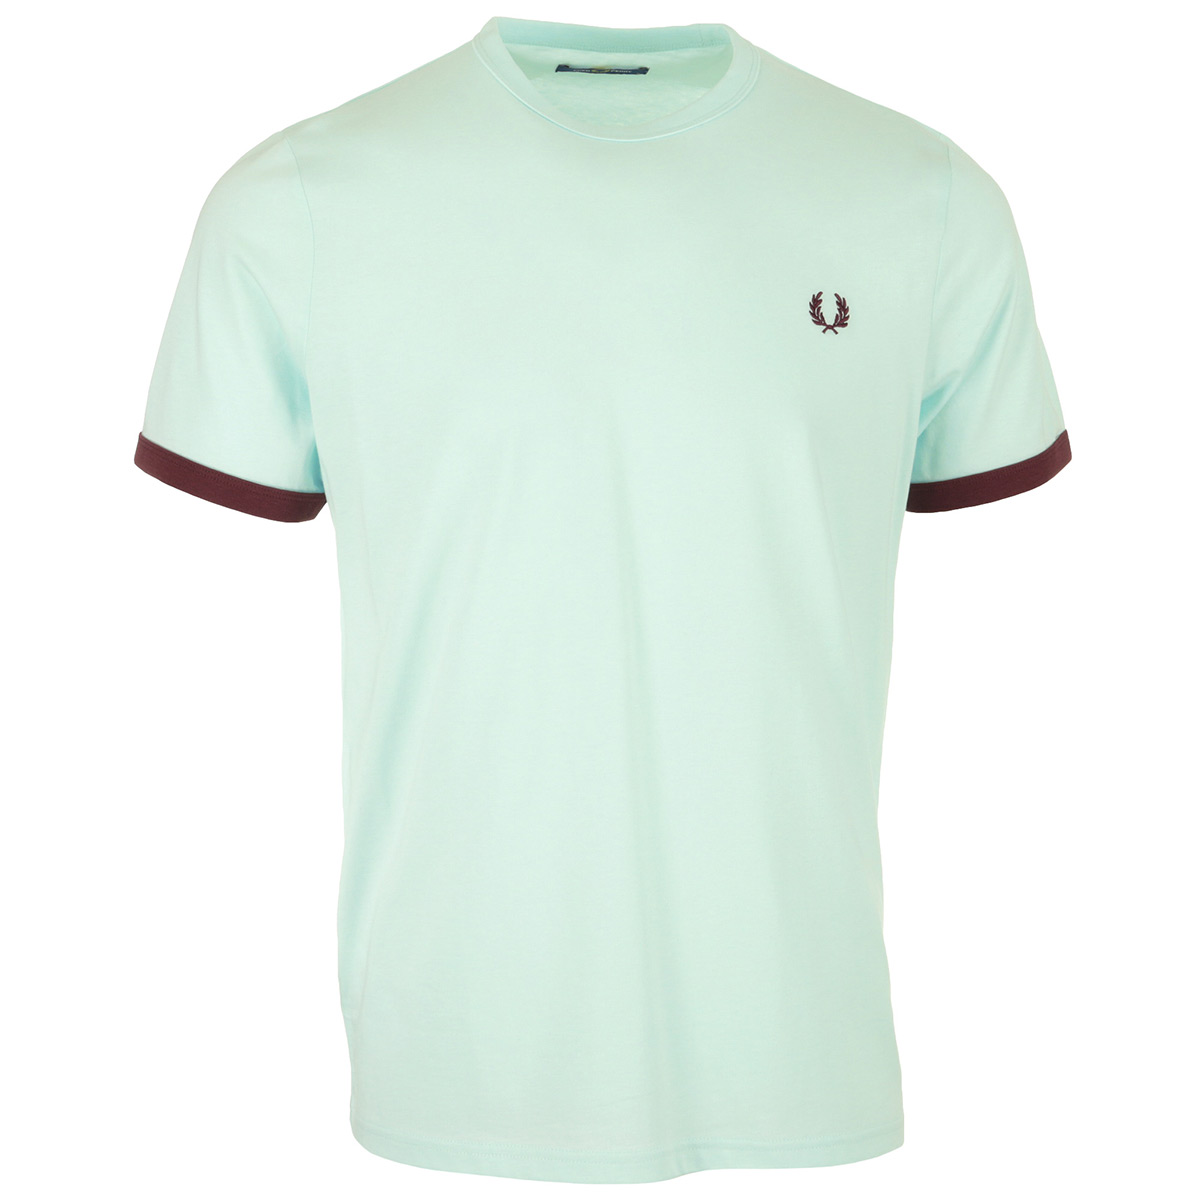 Fred Perry Ringer T-Shirt